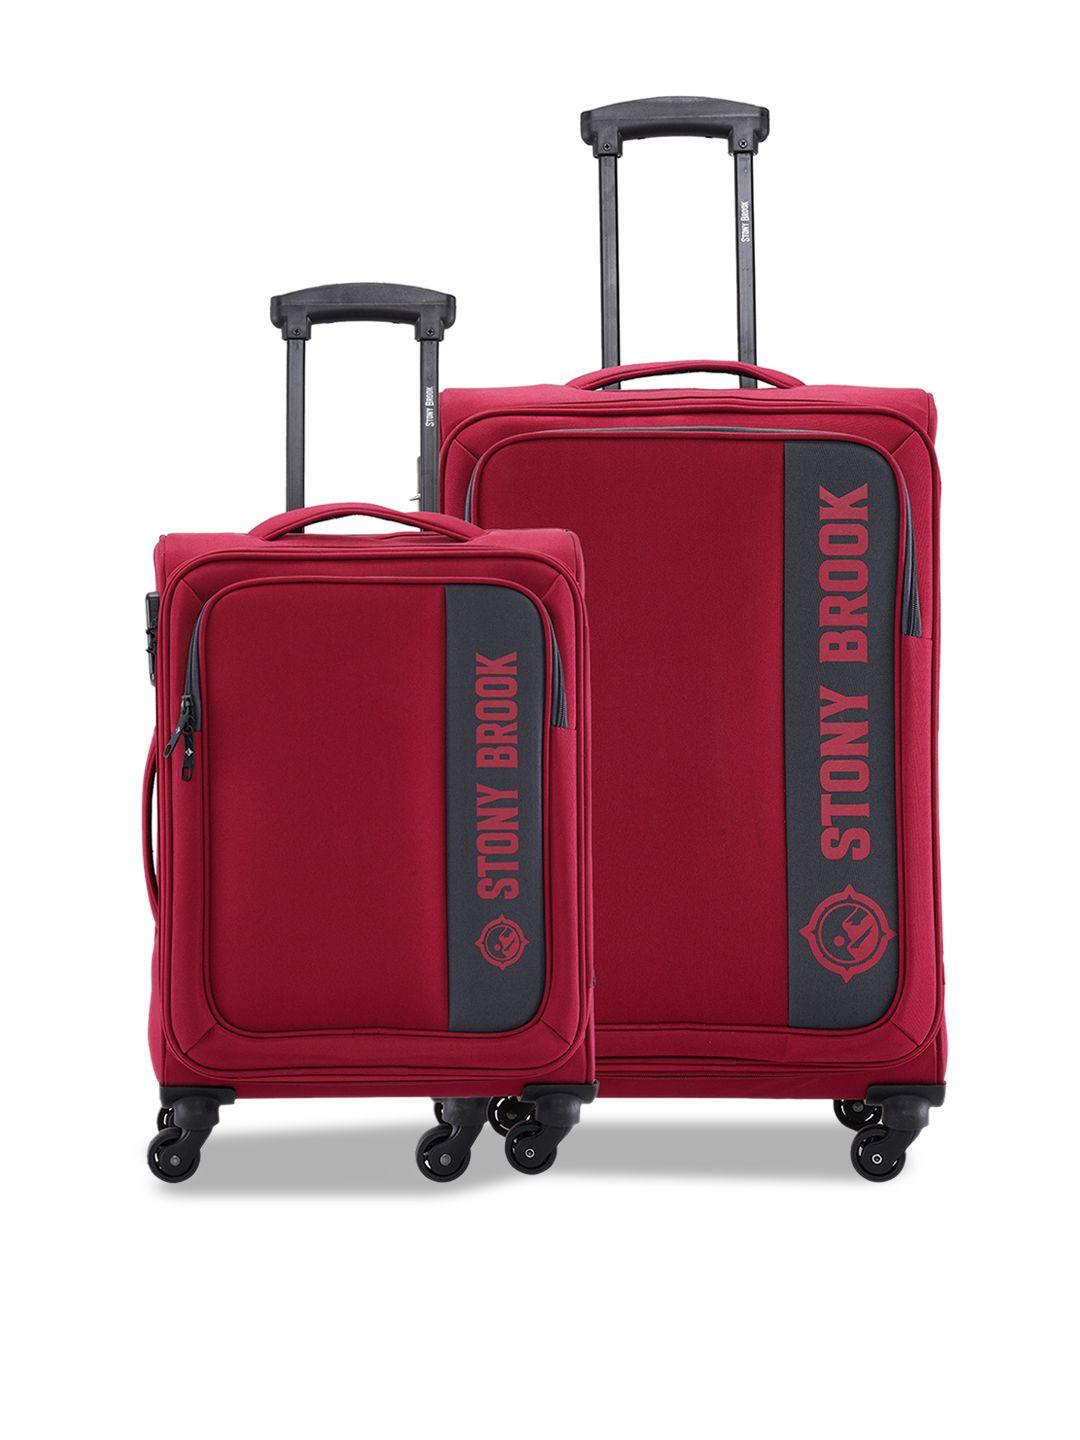 stony brook by nasher miles set of 2 printed hard-sided trolley suitcases